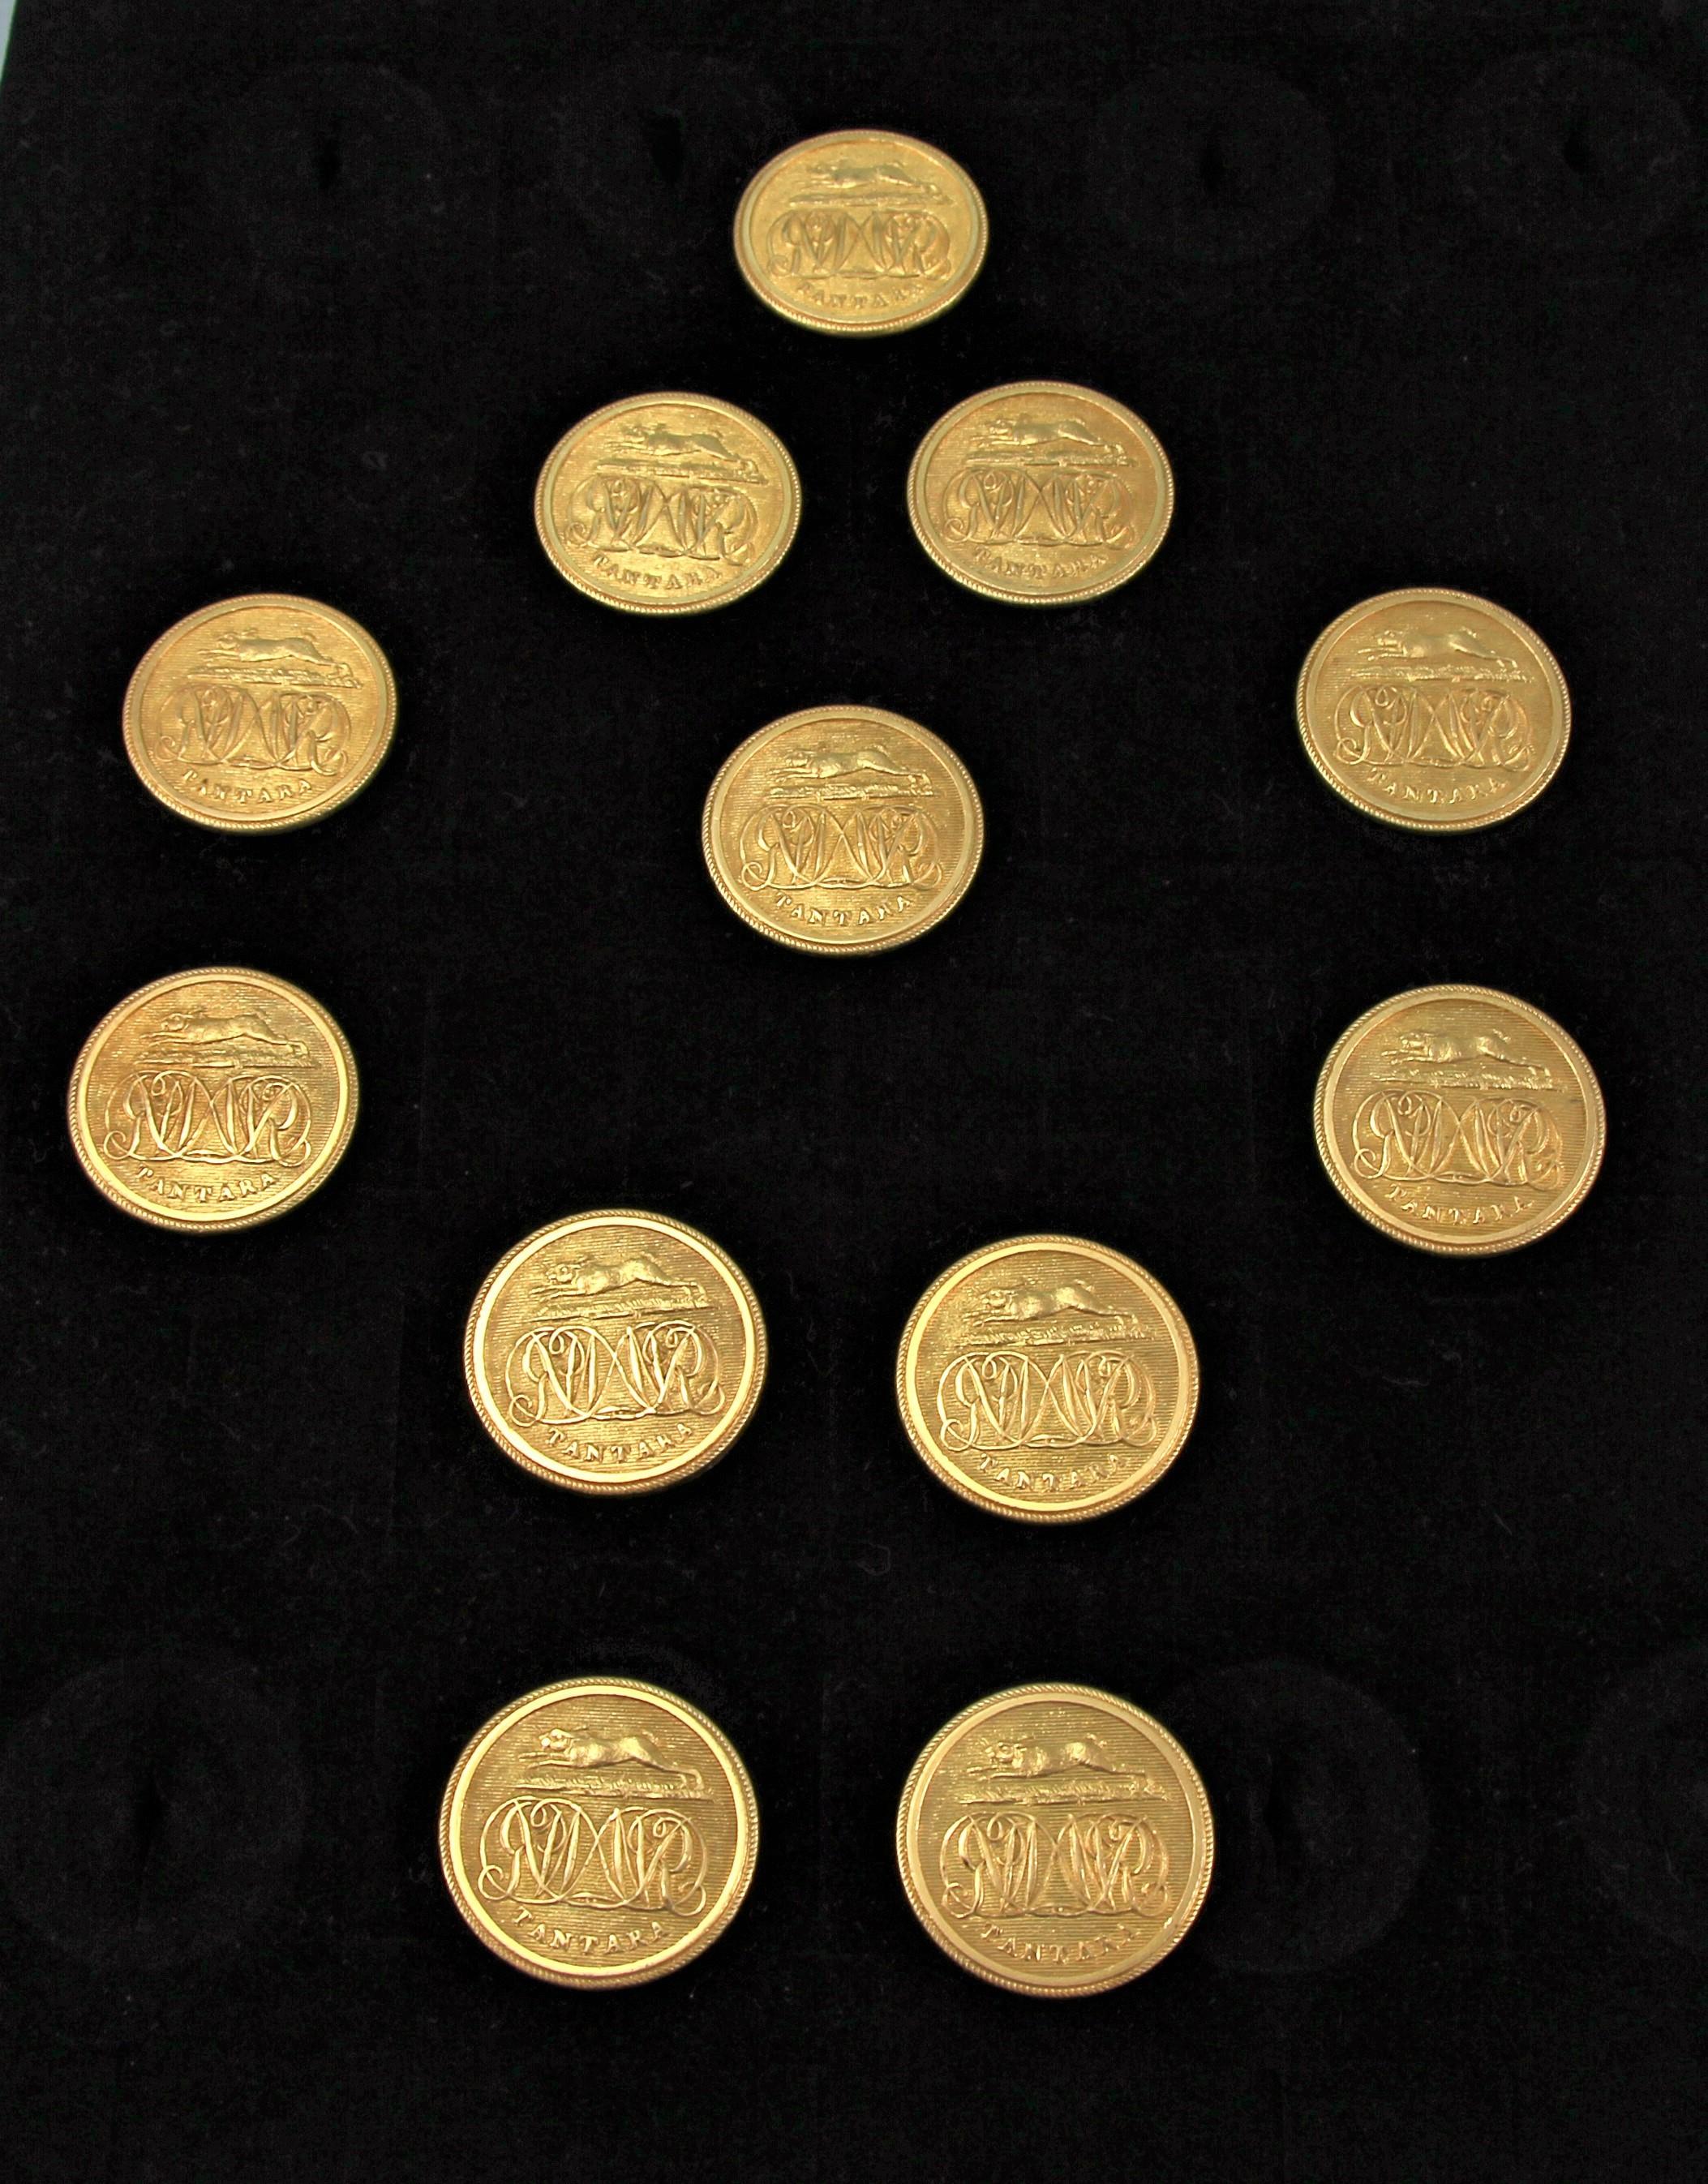 Very charming early 19th century set of 12 brass gilt hunting buttons. 
Maker: Firmin & Langdale, London, circa 1817. 

Each button illustrates the same initials and scene depicting a hound in full pursuit with the inscription 'Tantara' meaning